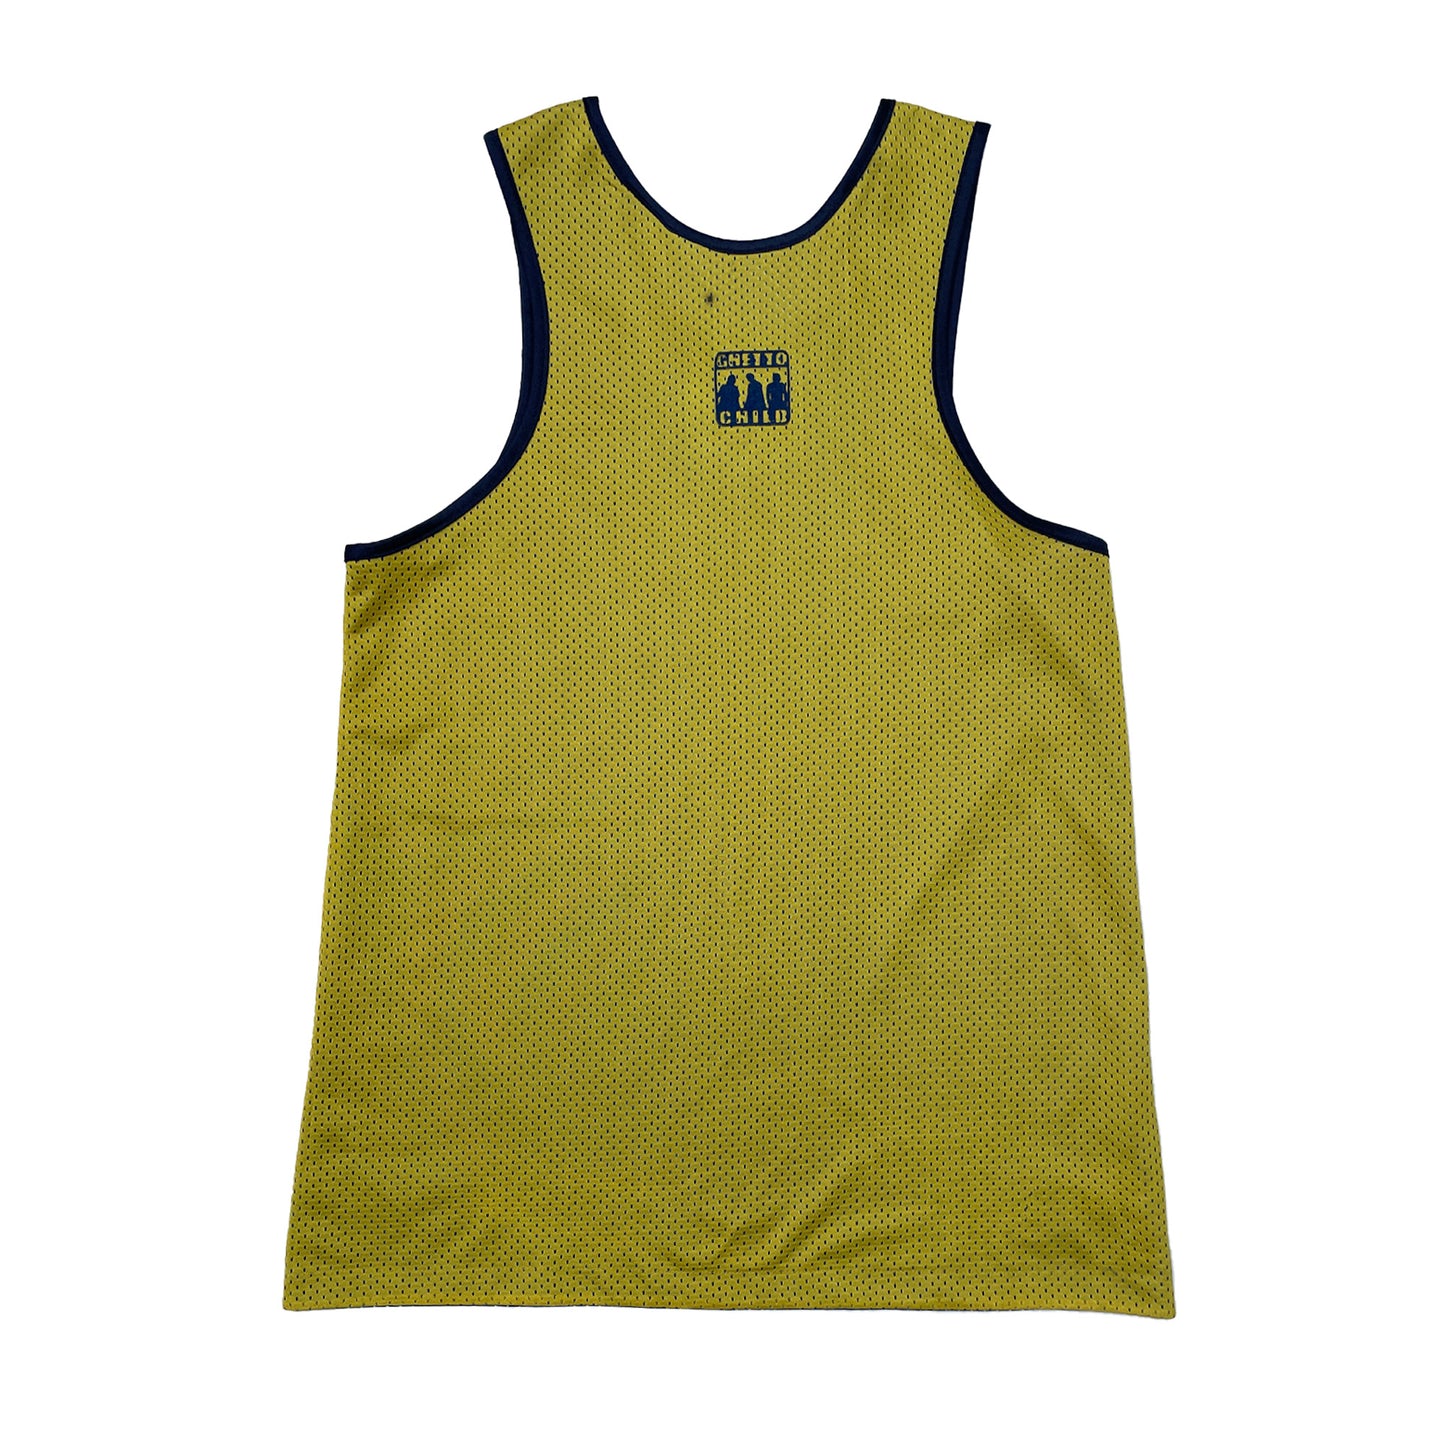 Ghetto Child 'Reversible' Basketball Jersey (Blue/Yellow) VINTAGE 90s